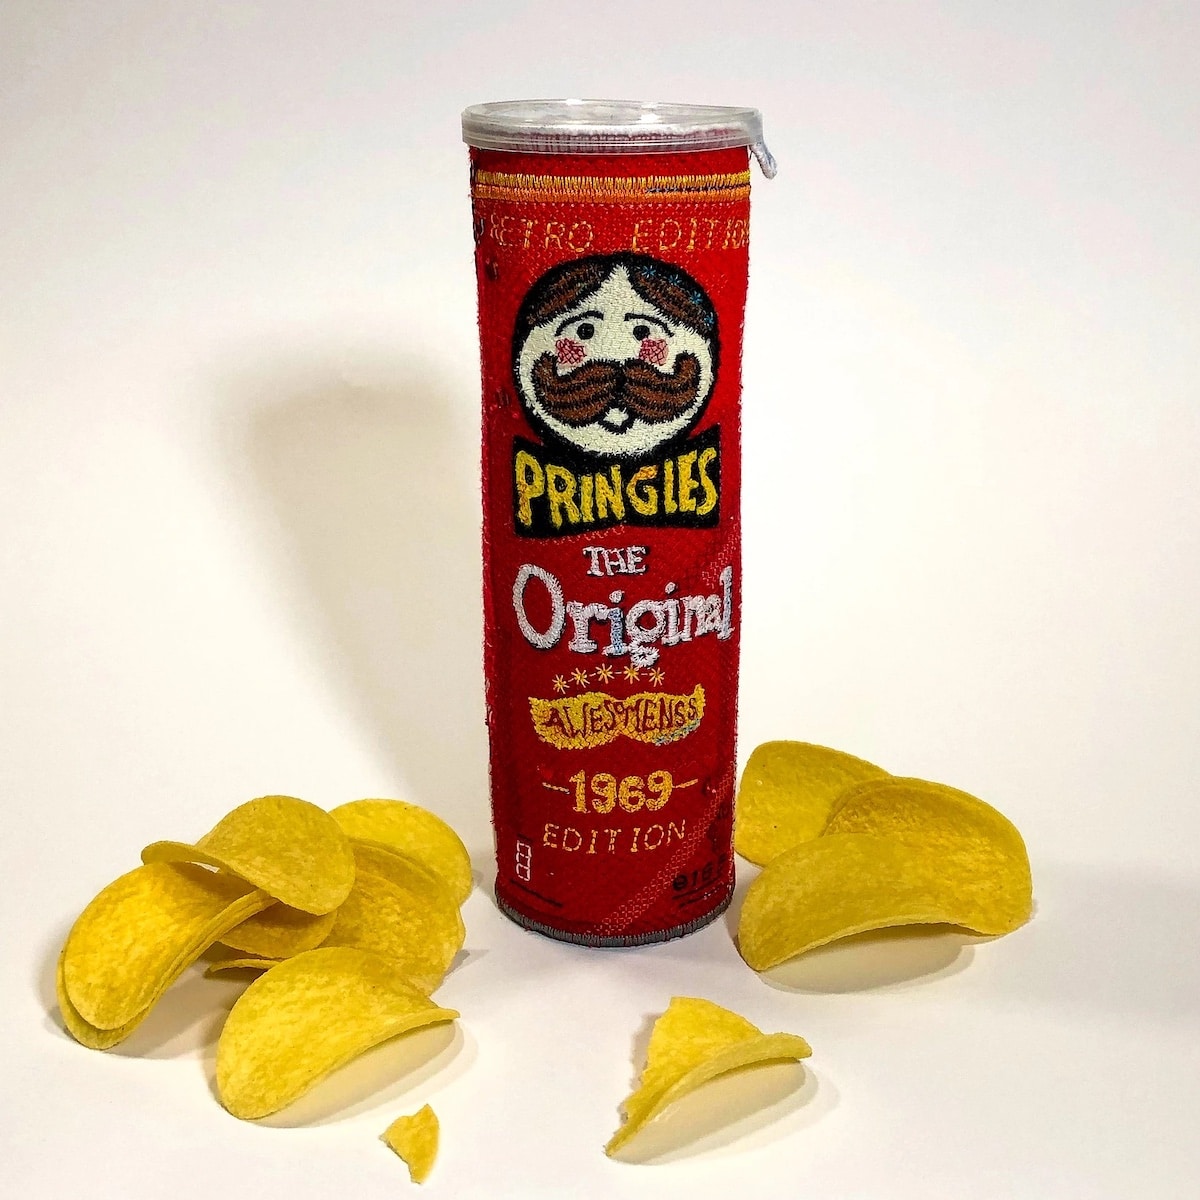 Felt and Embroidery Pringles Can